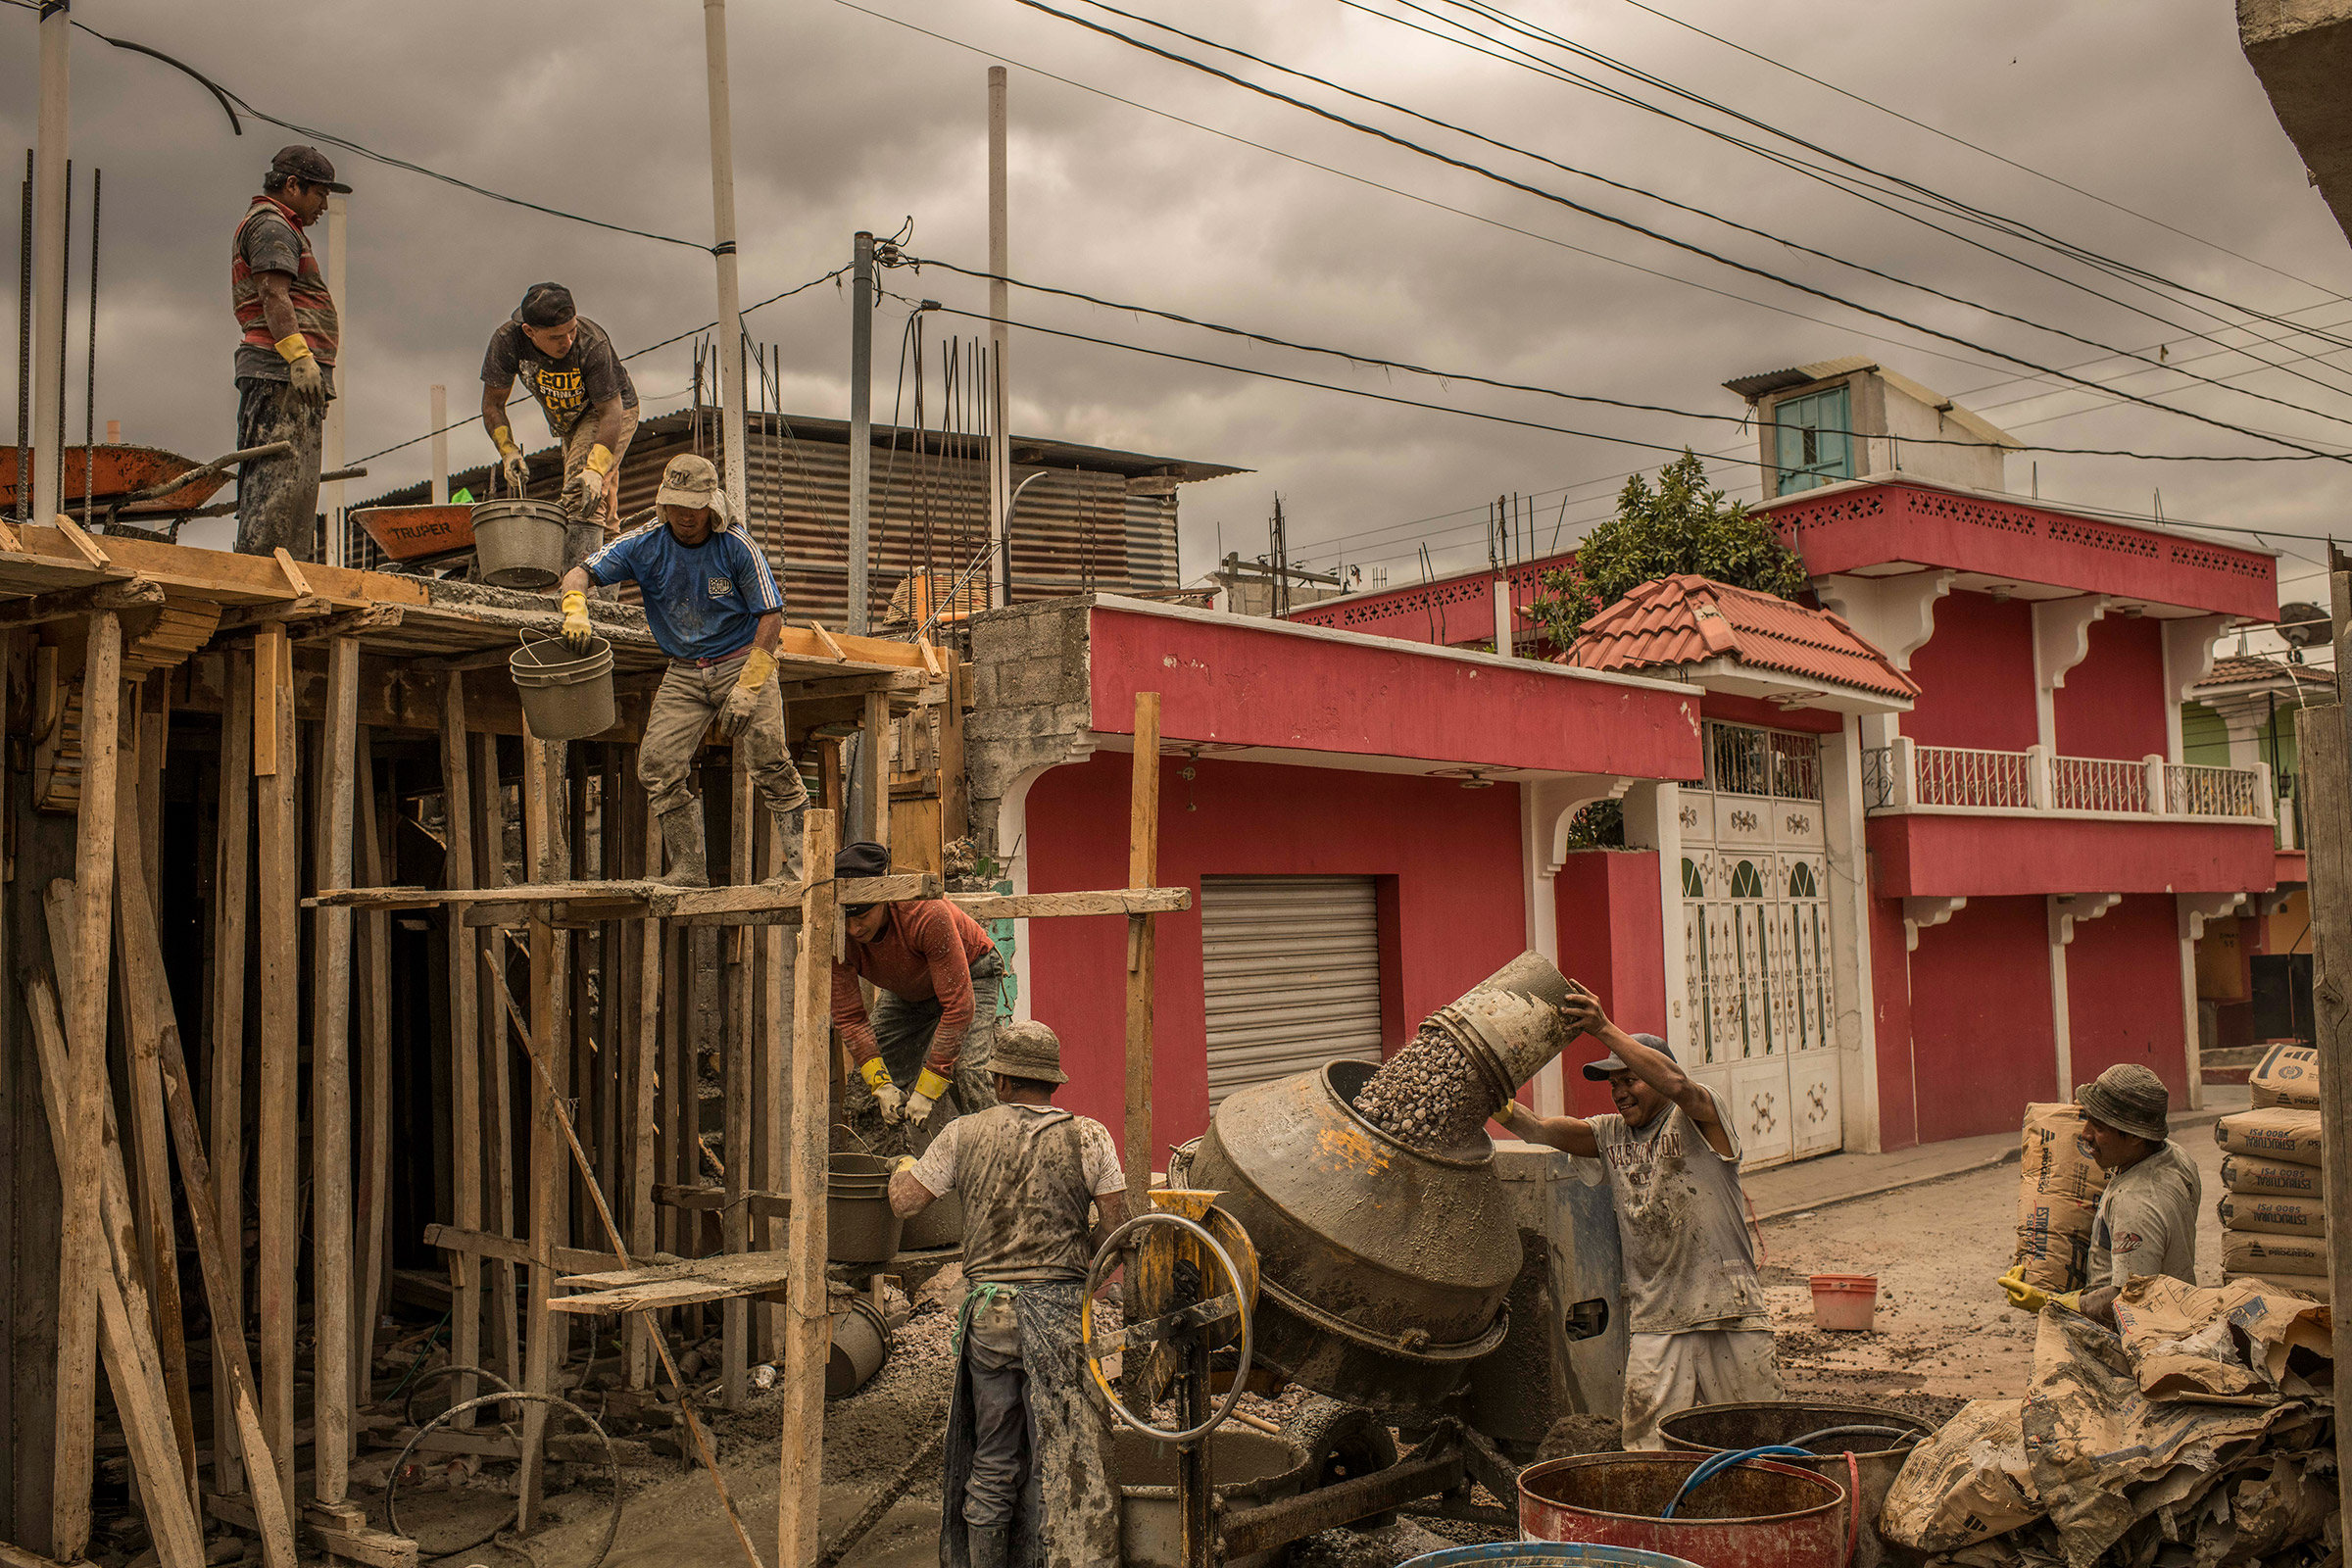 Workers build a house in Cajolá, <a href="https://time.com/6166459/guatemala-migration-economy-remittances/">Quetzaltenango, Guatemala</a>, paid for by remittances sent home by migrant workers, on April 8. (Daniele Volpe for TIME)